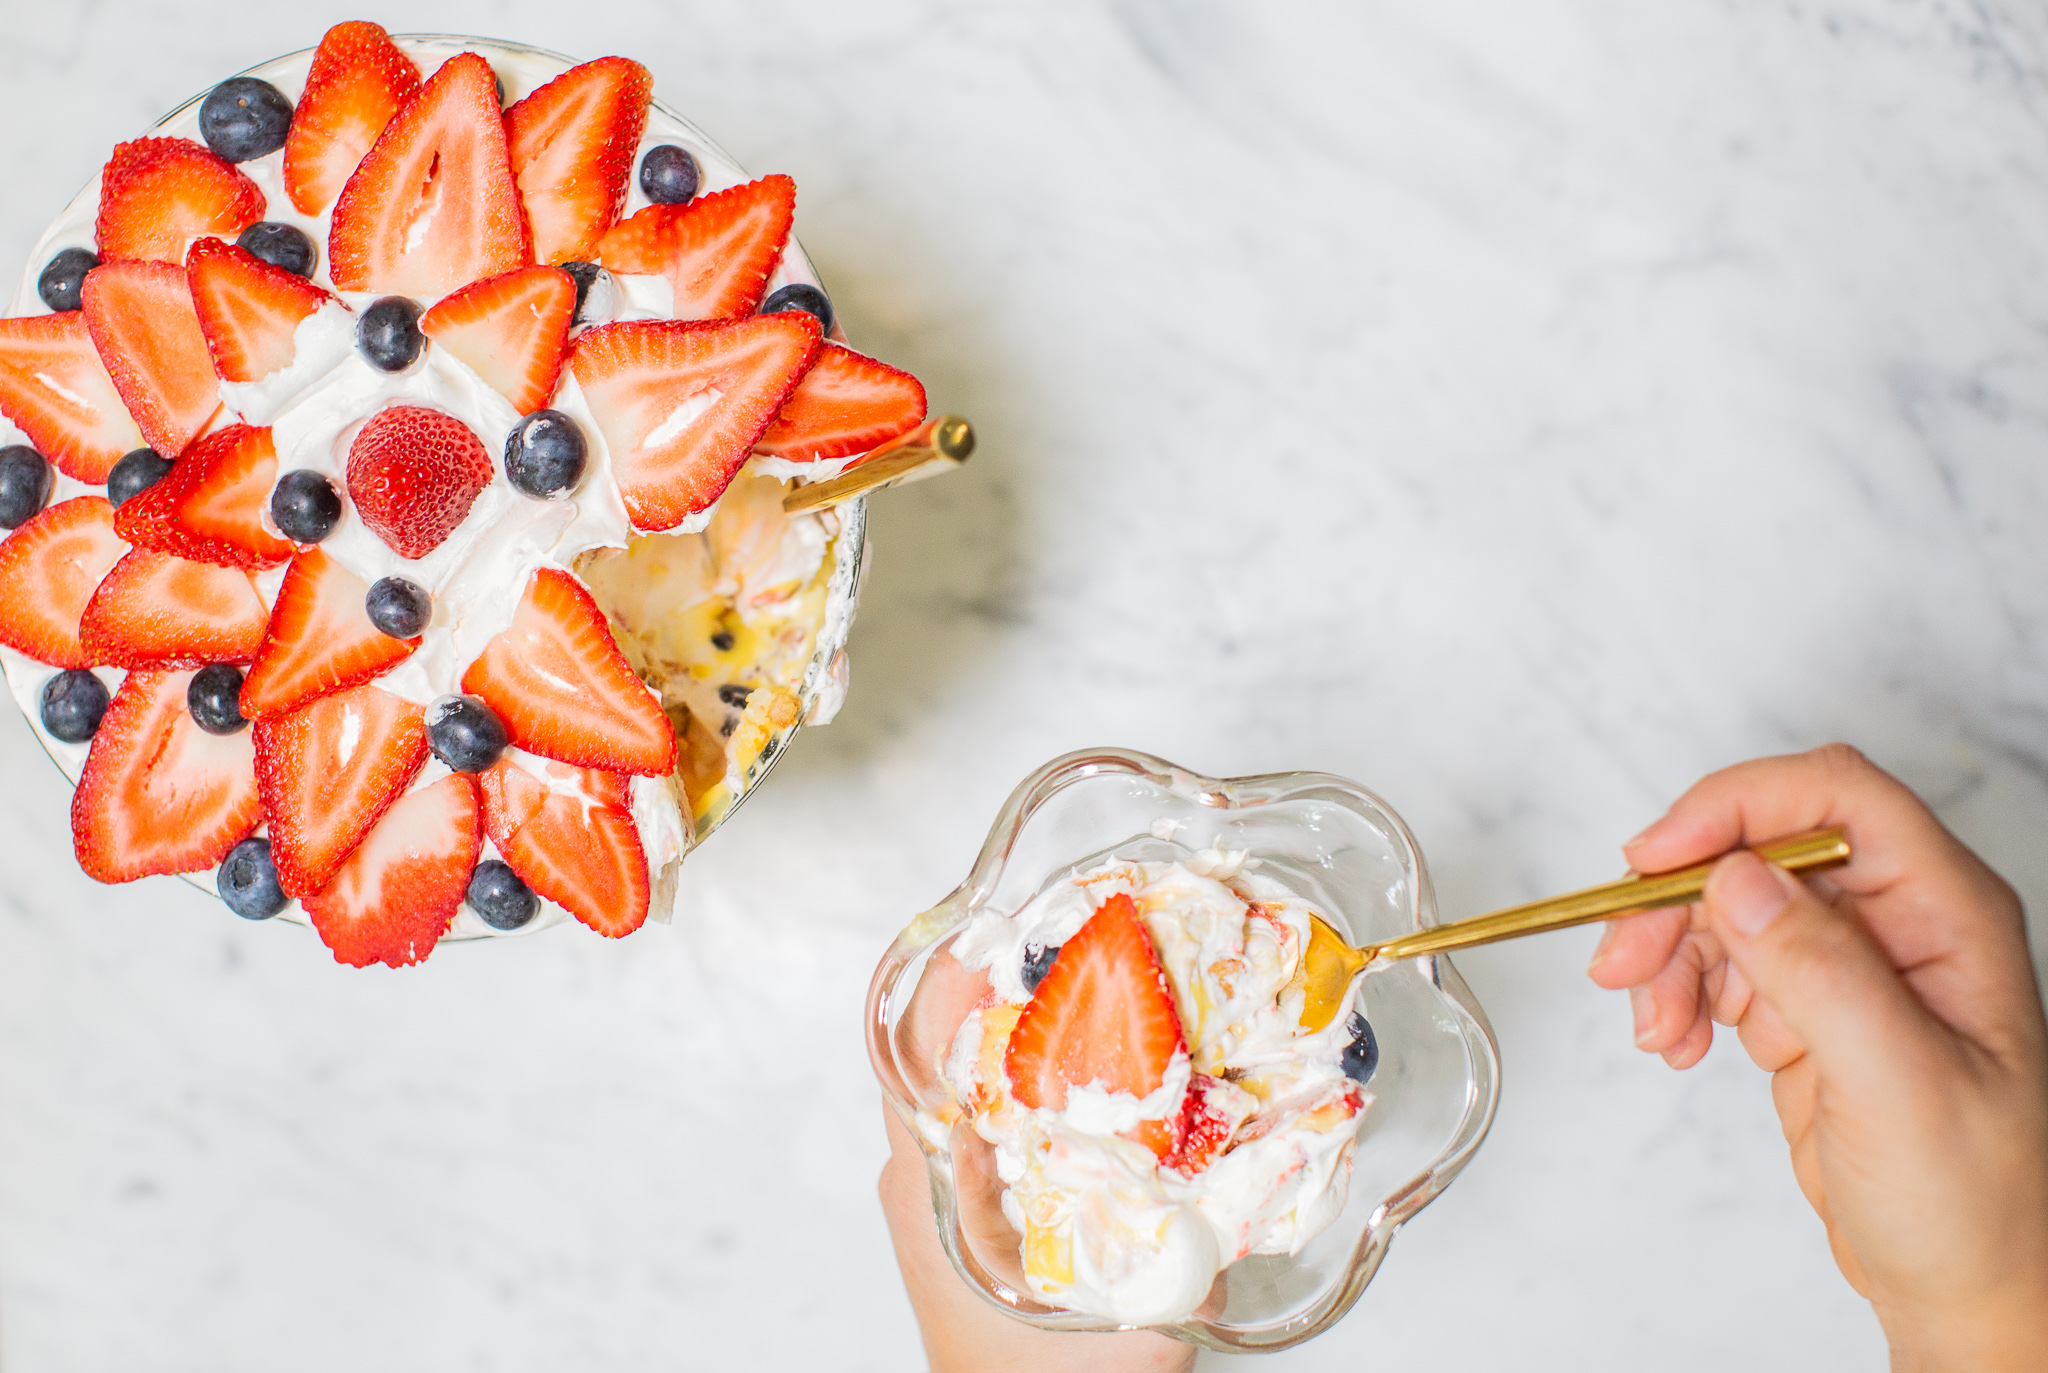 Three Berry Vanilla Pudding Trifle Recipe (the Perfect Summertime Dessert) by popular lifestyle blog, Coffee Beans and Bobby Pins: flatlay image of a three berry vanilla pudding trifle and a hand holding a clear glass desert dish with a portion of the trifle in it.